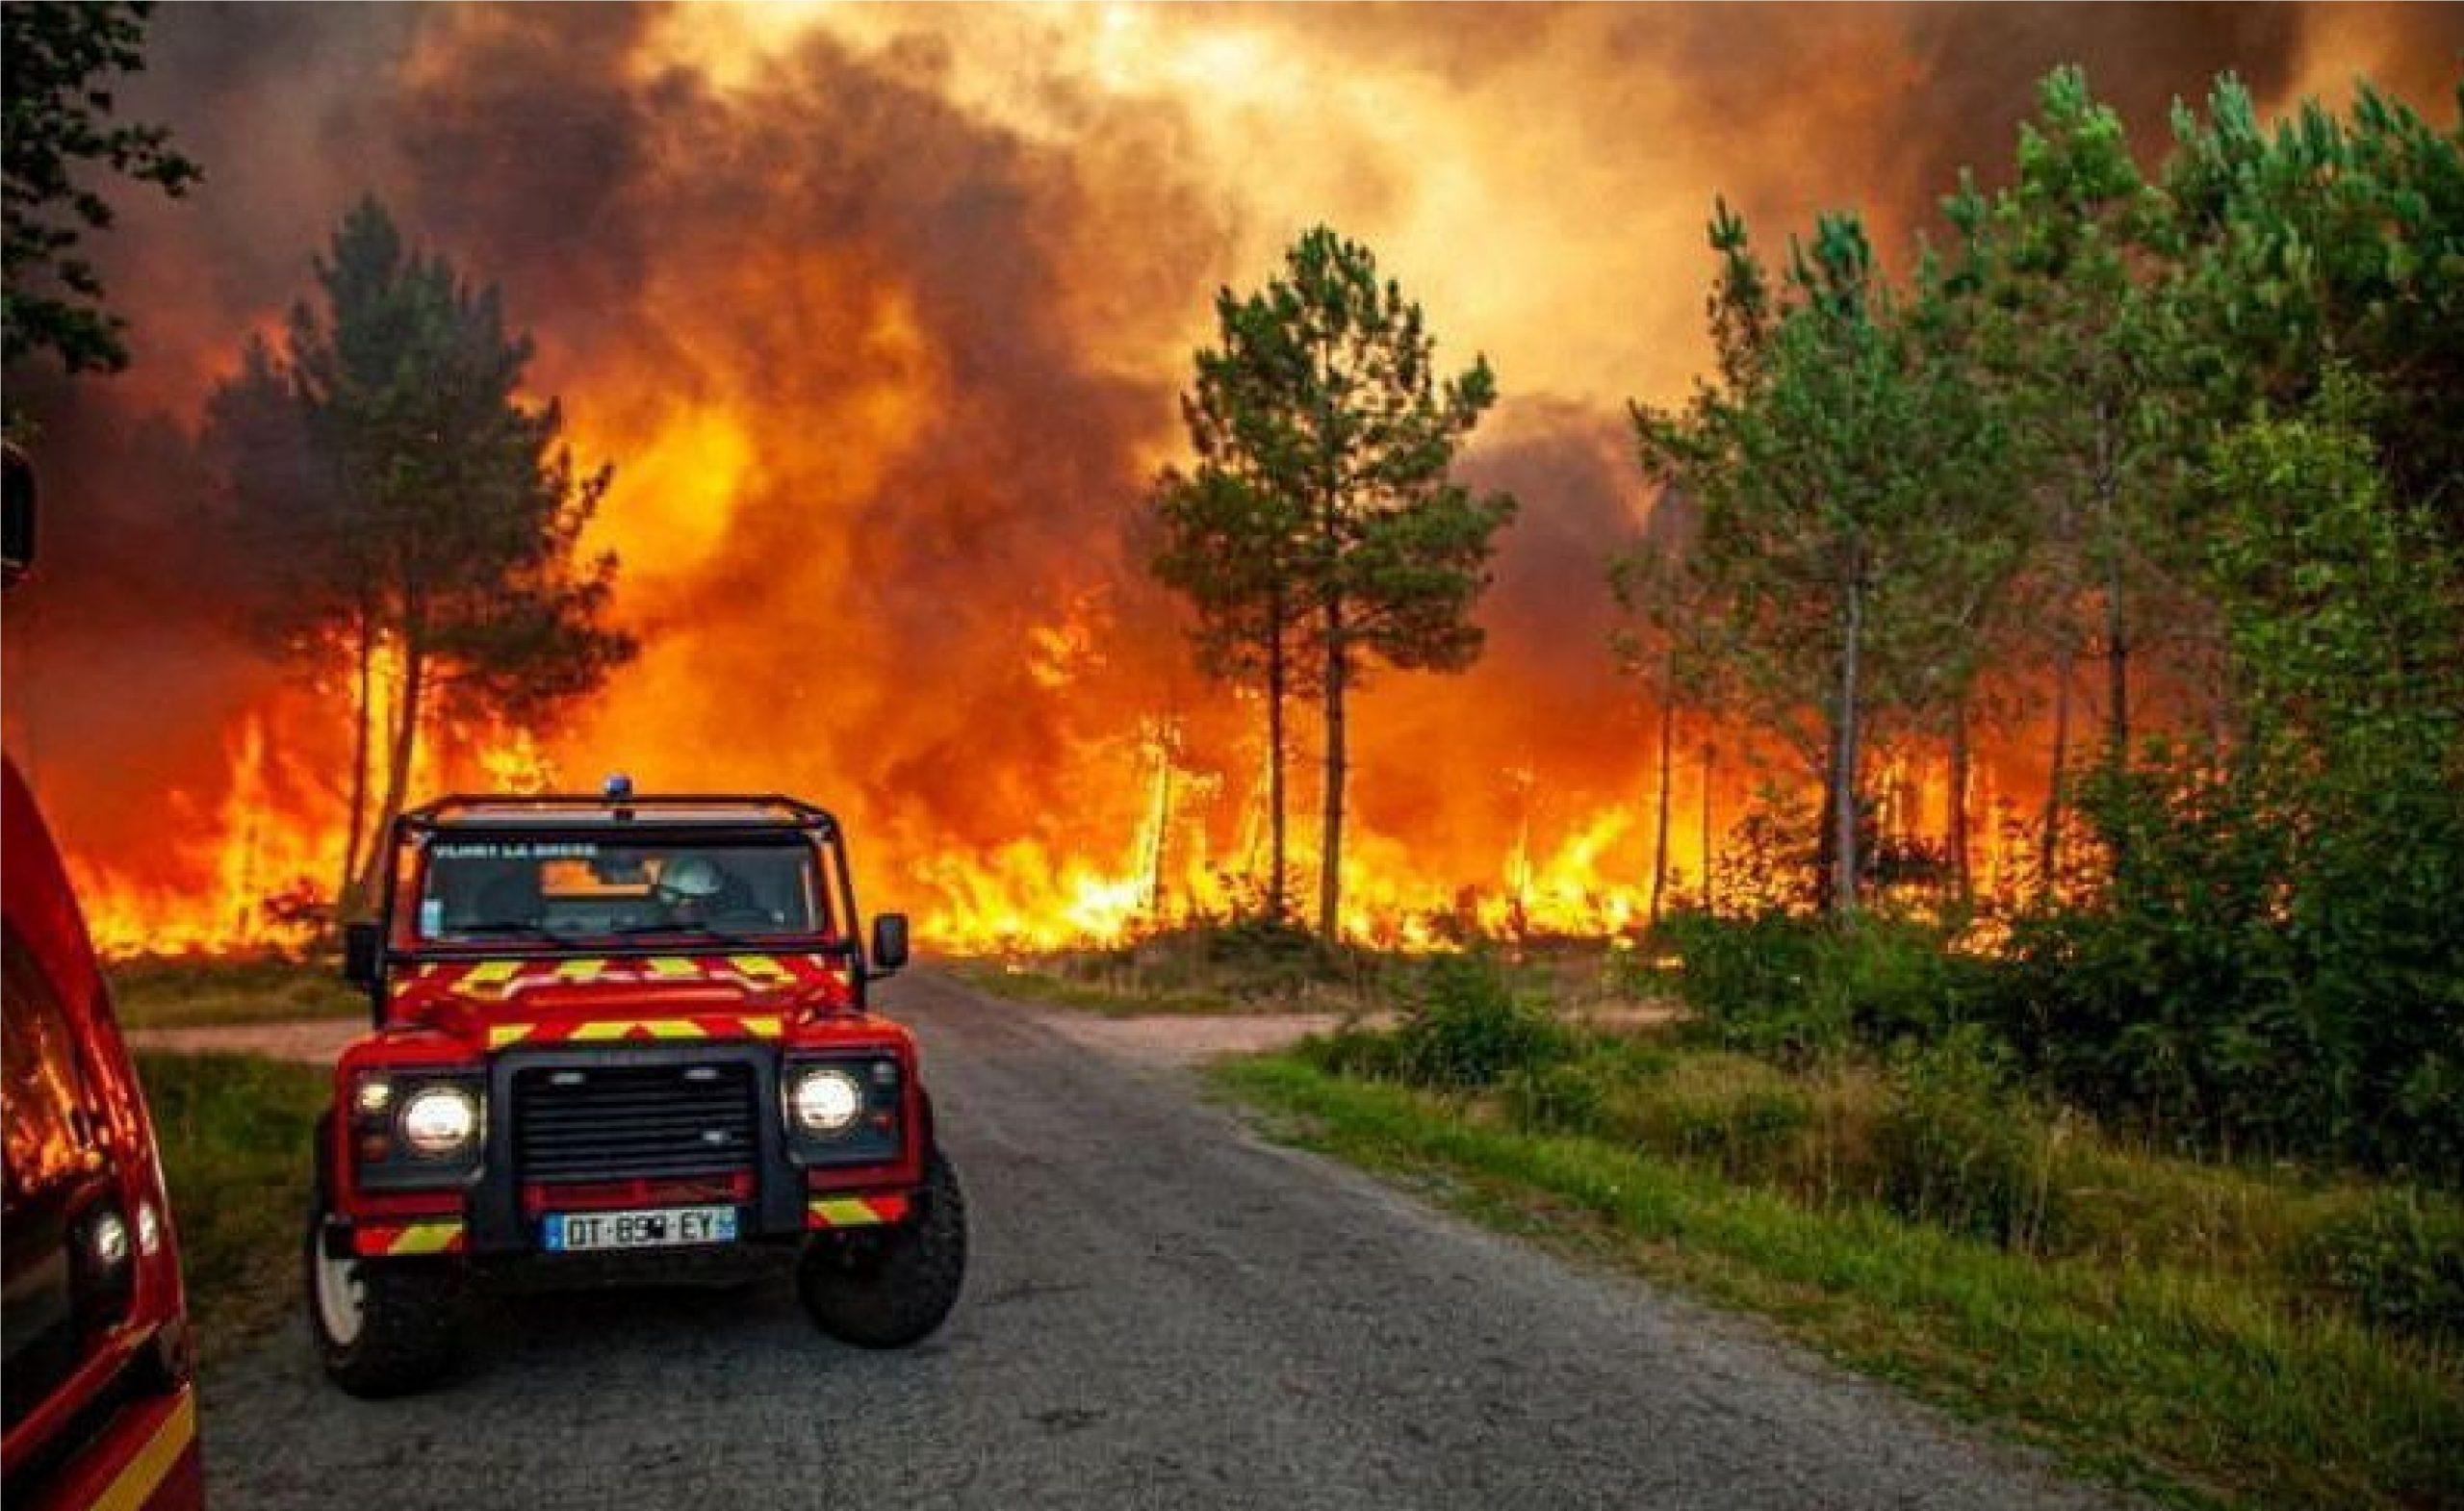 Wildfires rage in France and Spain as heatwaves sear Europe